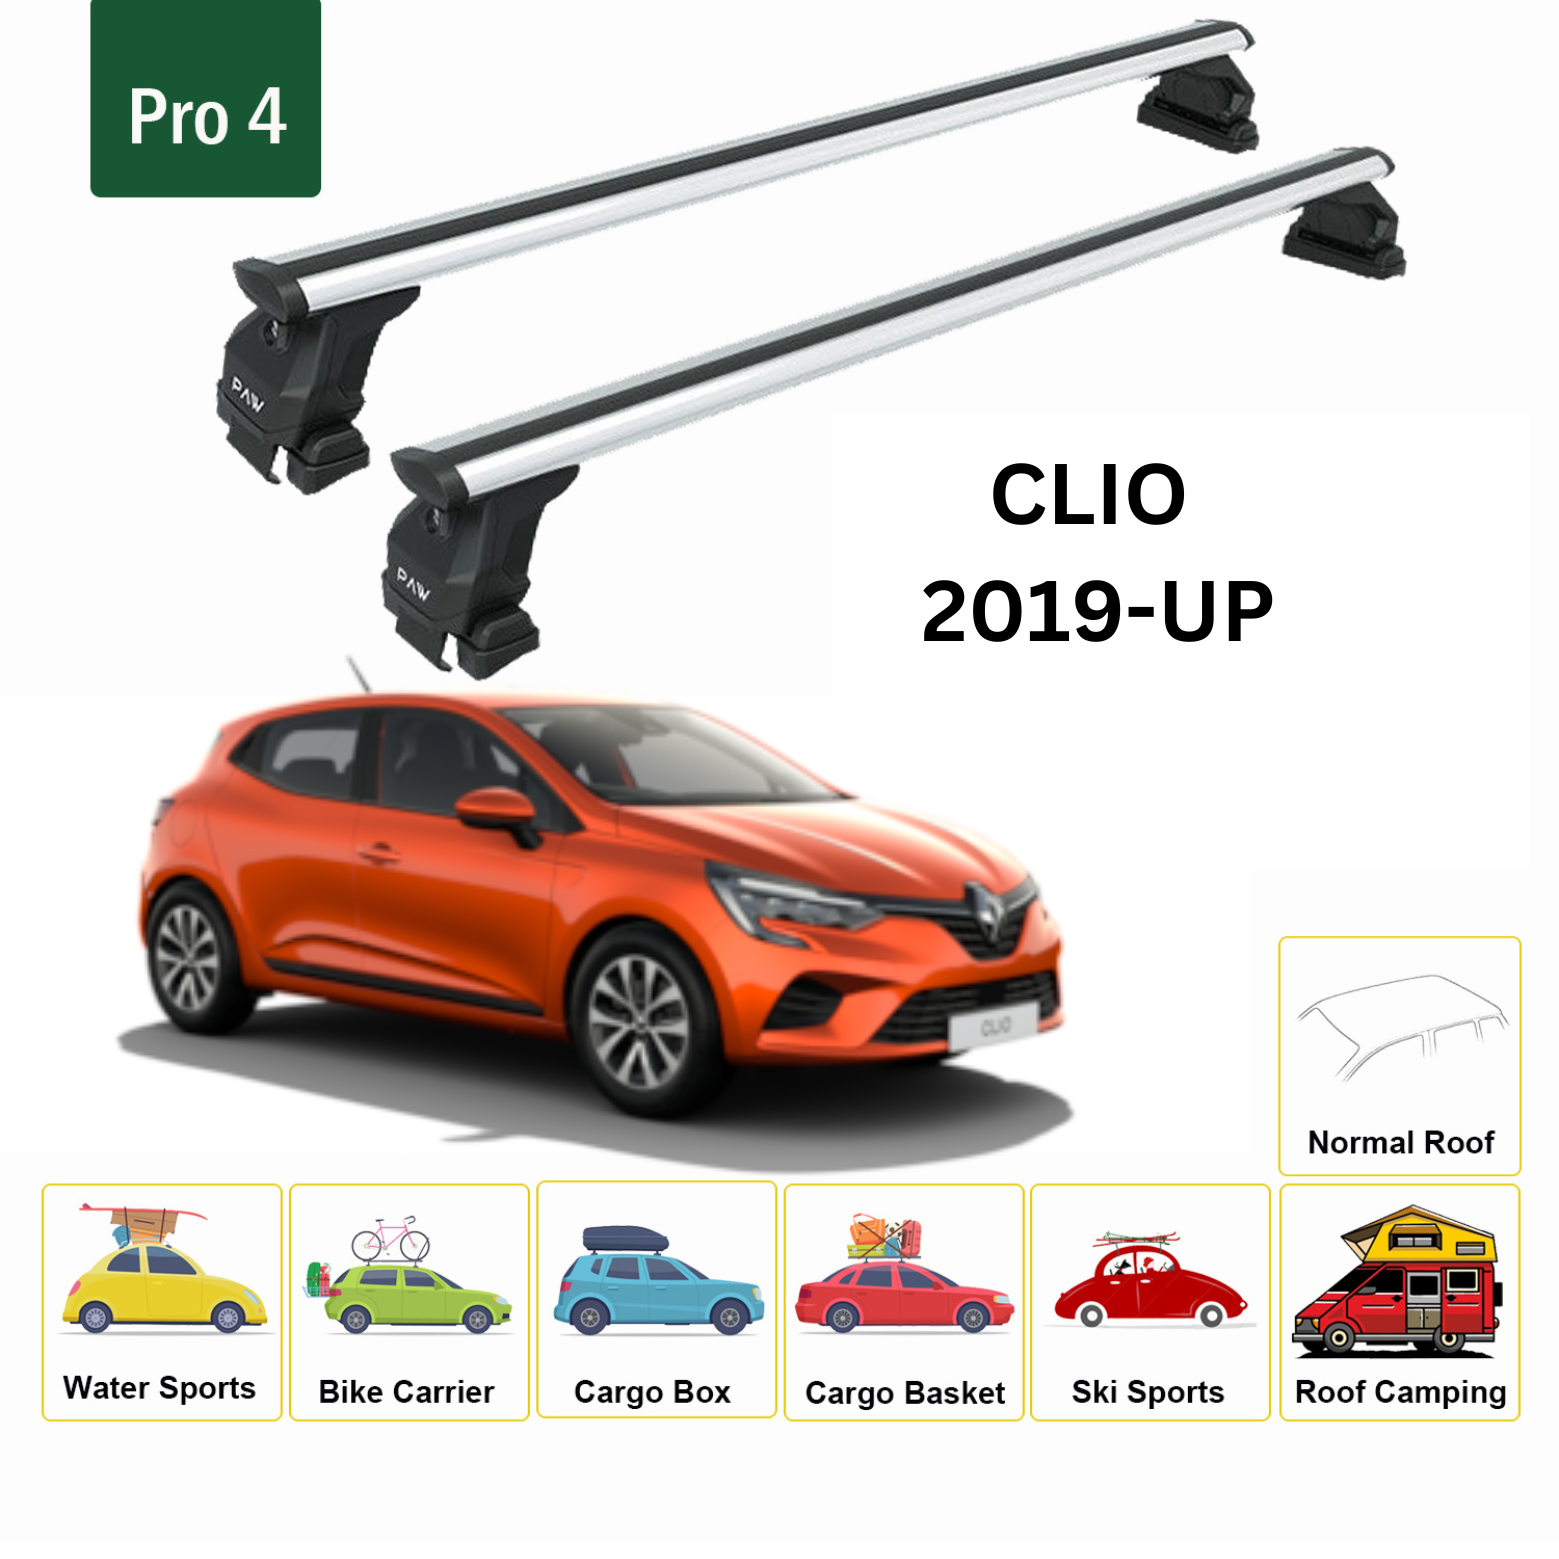 For Renault Clio 2019-Up Roof Rack System, Aluminium Cross Bar, Metal Bracket, Normal Roof, Silver - 0